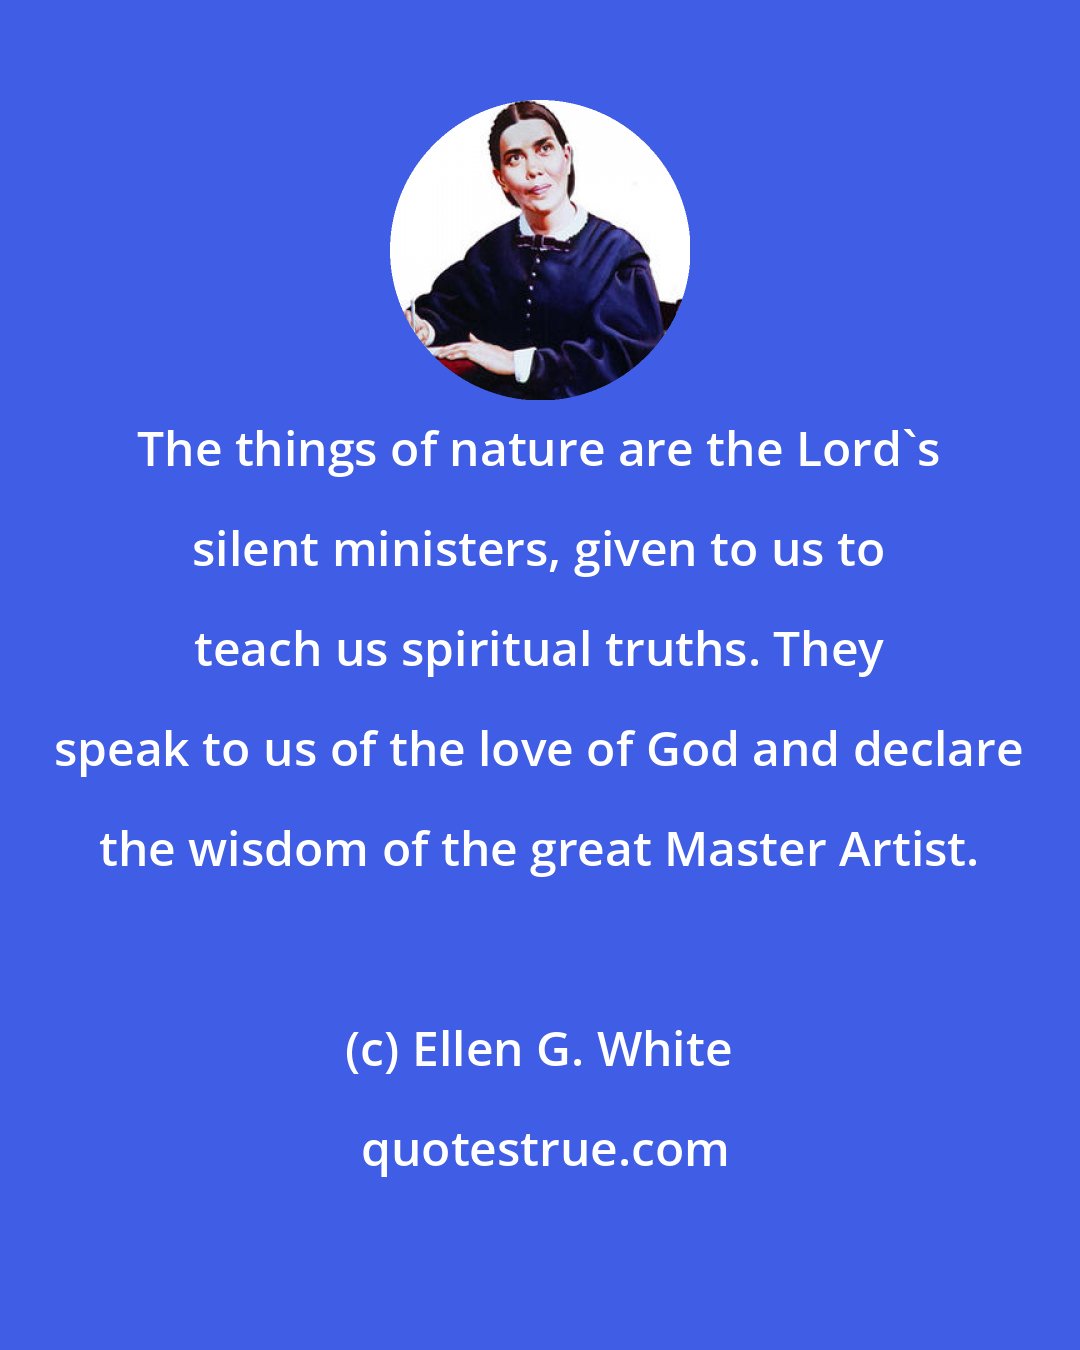 Ellen G. White: The things of nature are the Lord's silent ministers, given to us to teach us spiritual truths. They speak to us of the love of God and declare the wisdom of the great Master Artist.